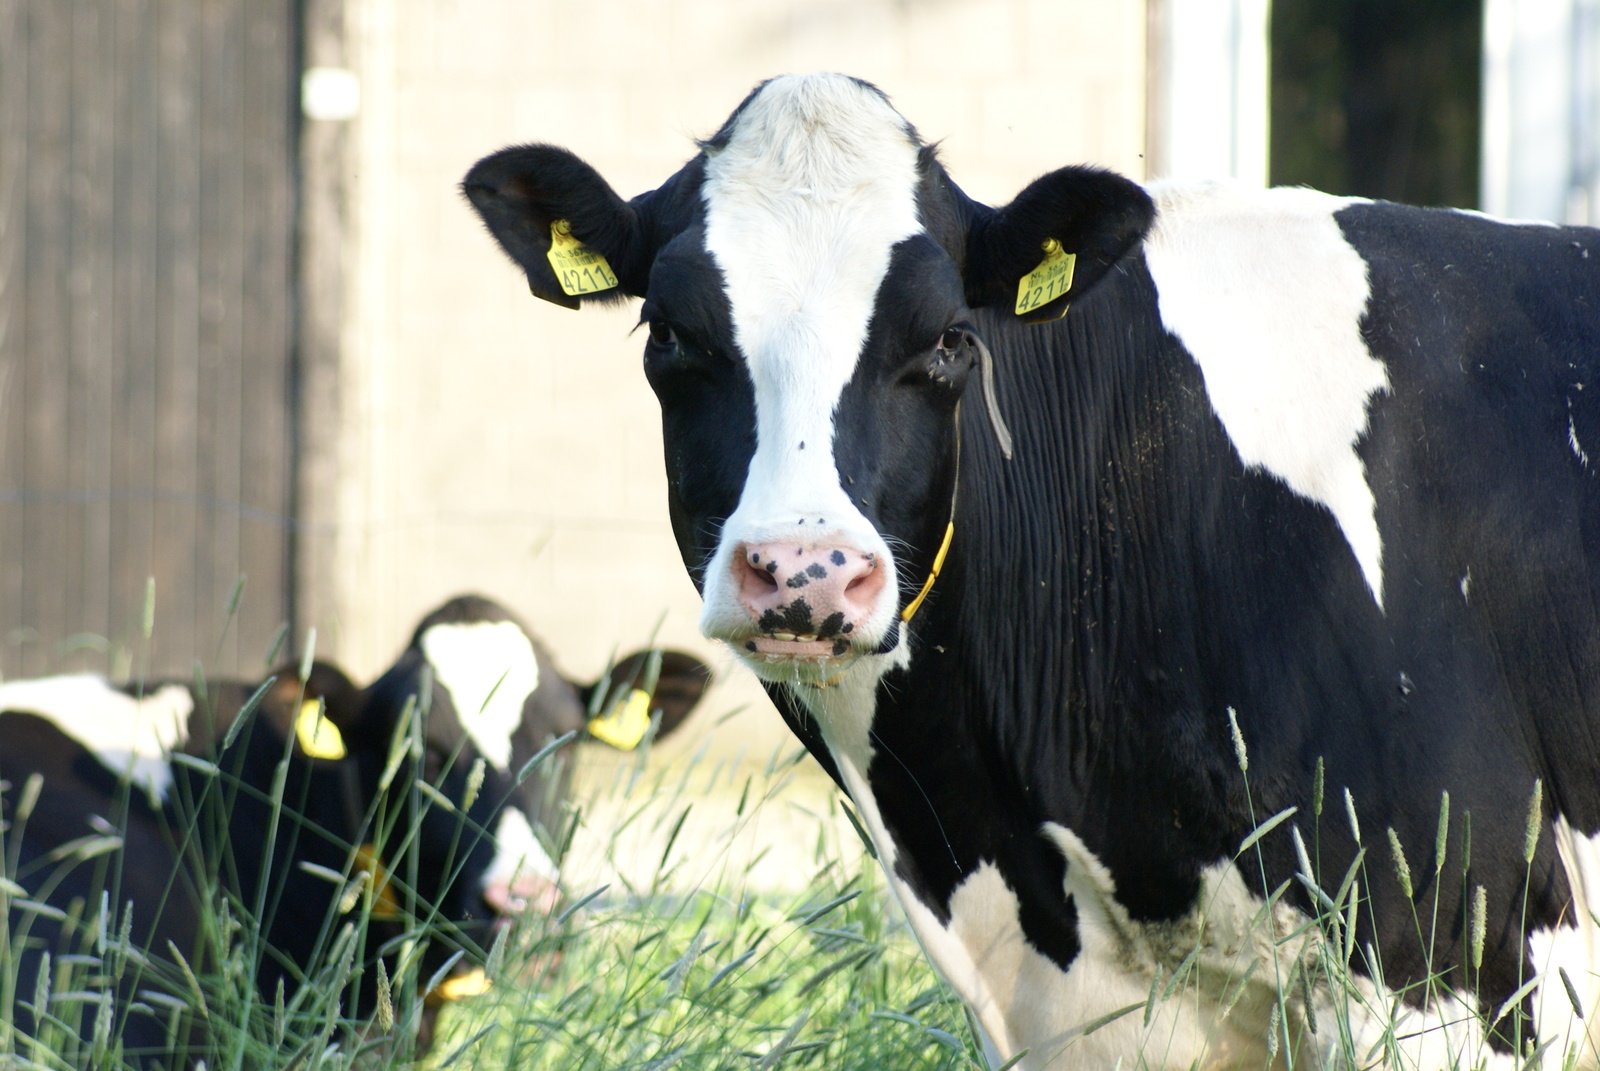 a black and white cow with some yellow tags on it's ears